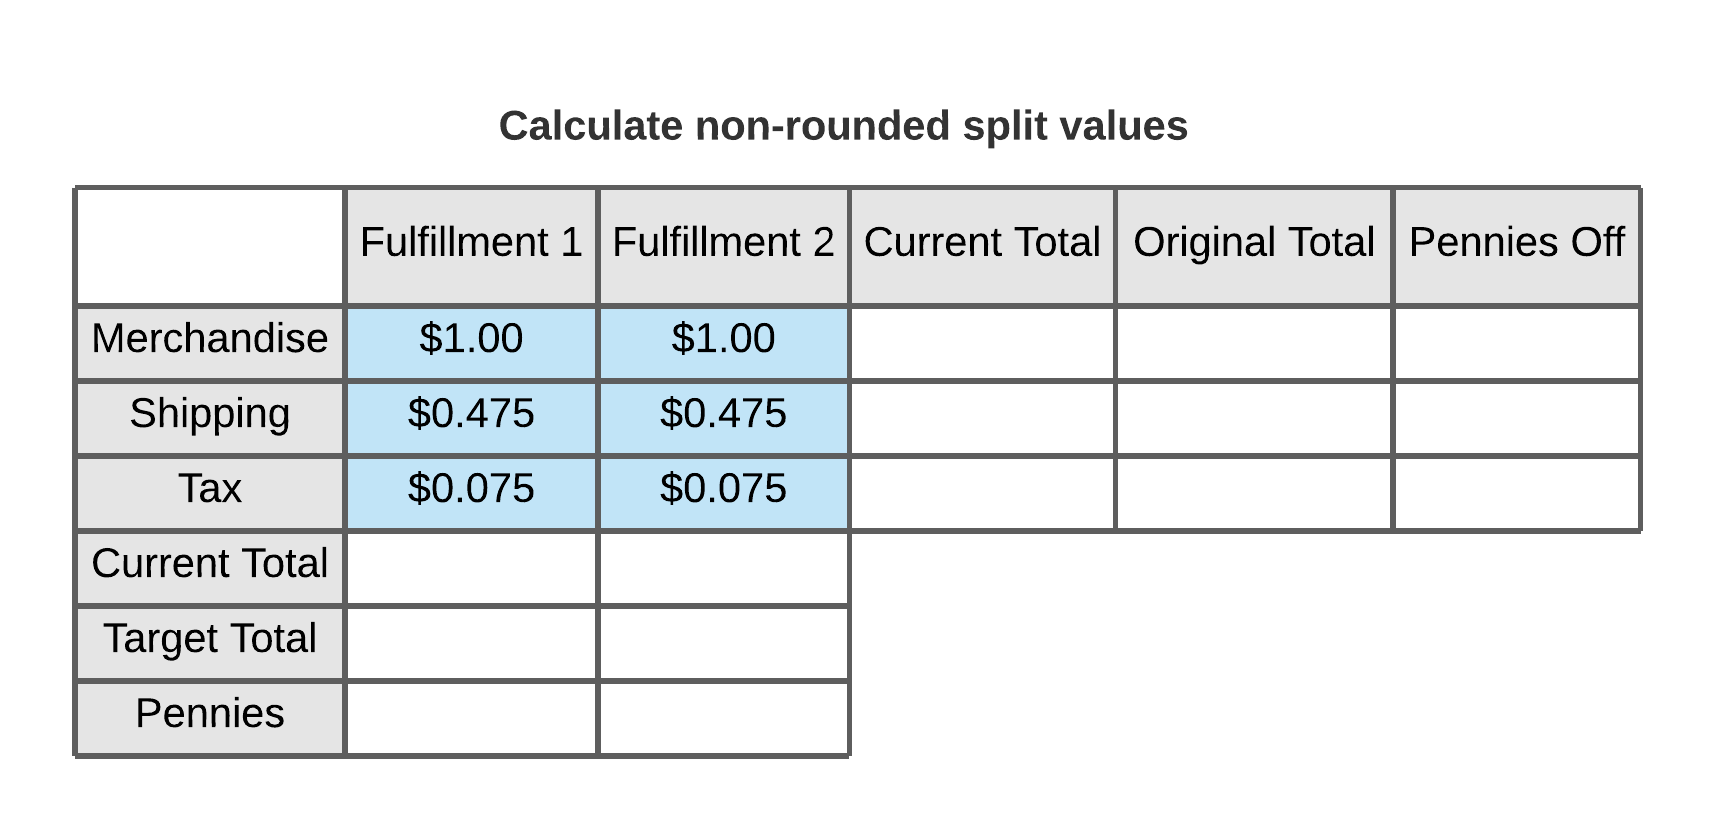 Calculate non-rounded split values